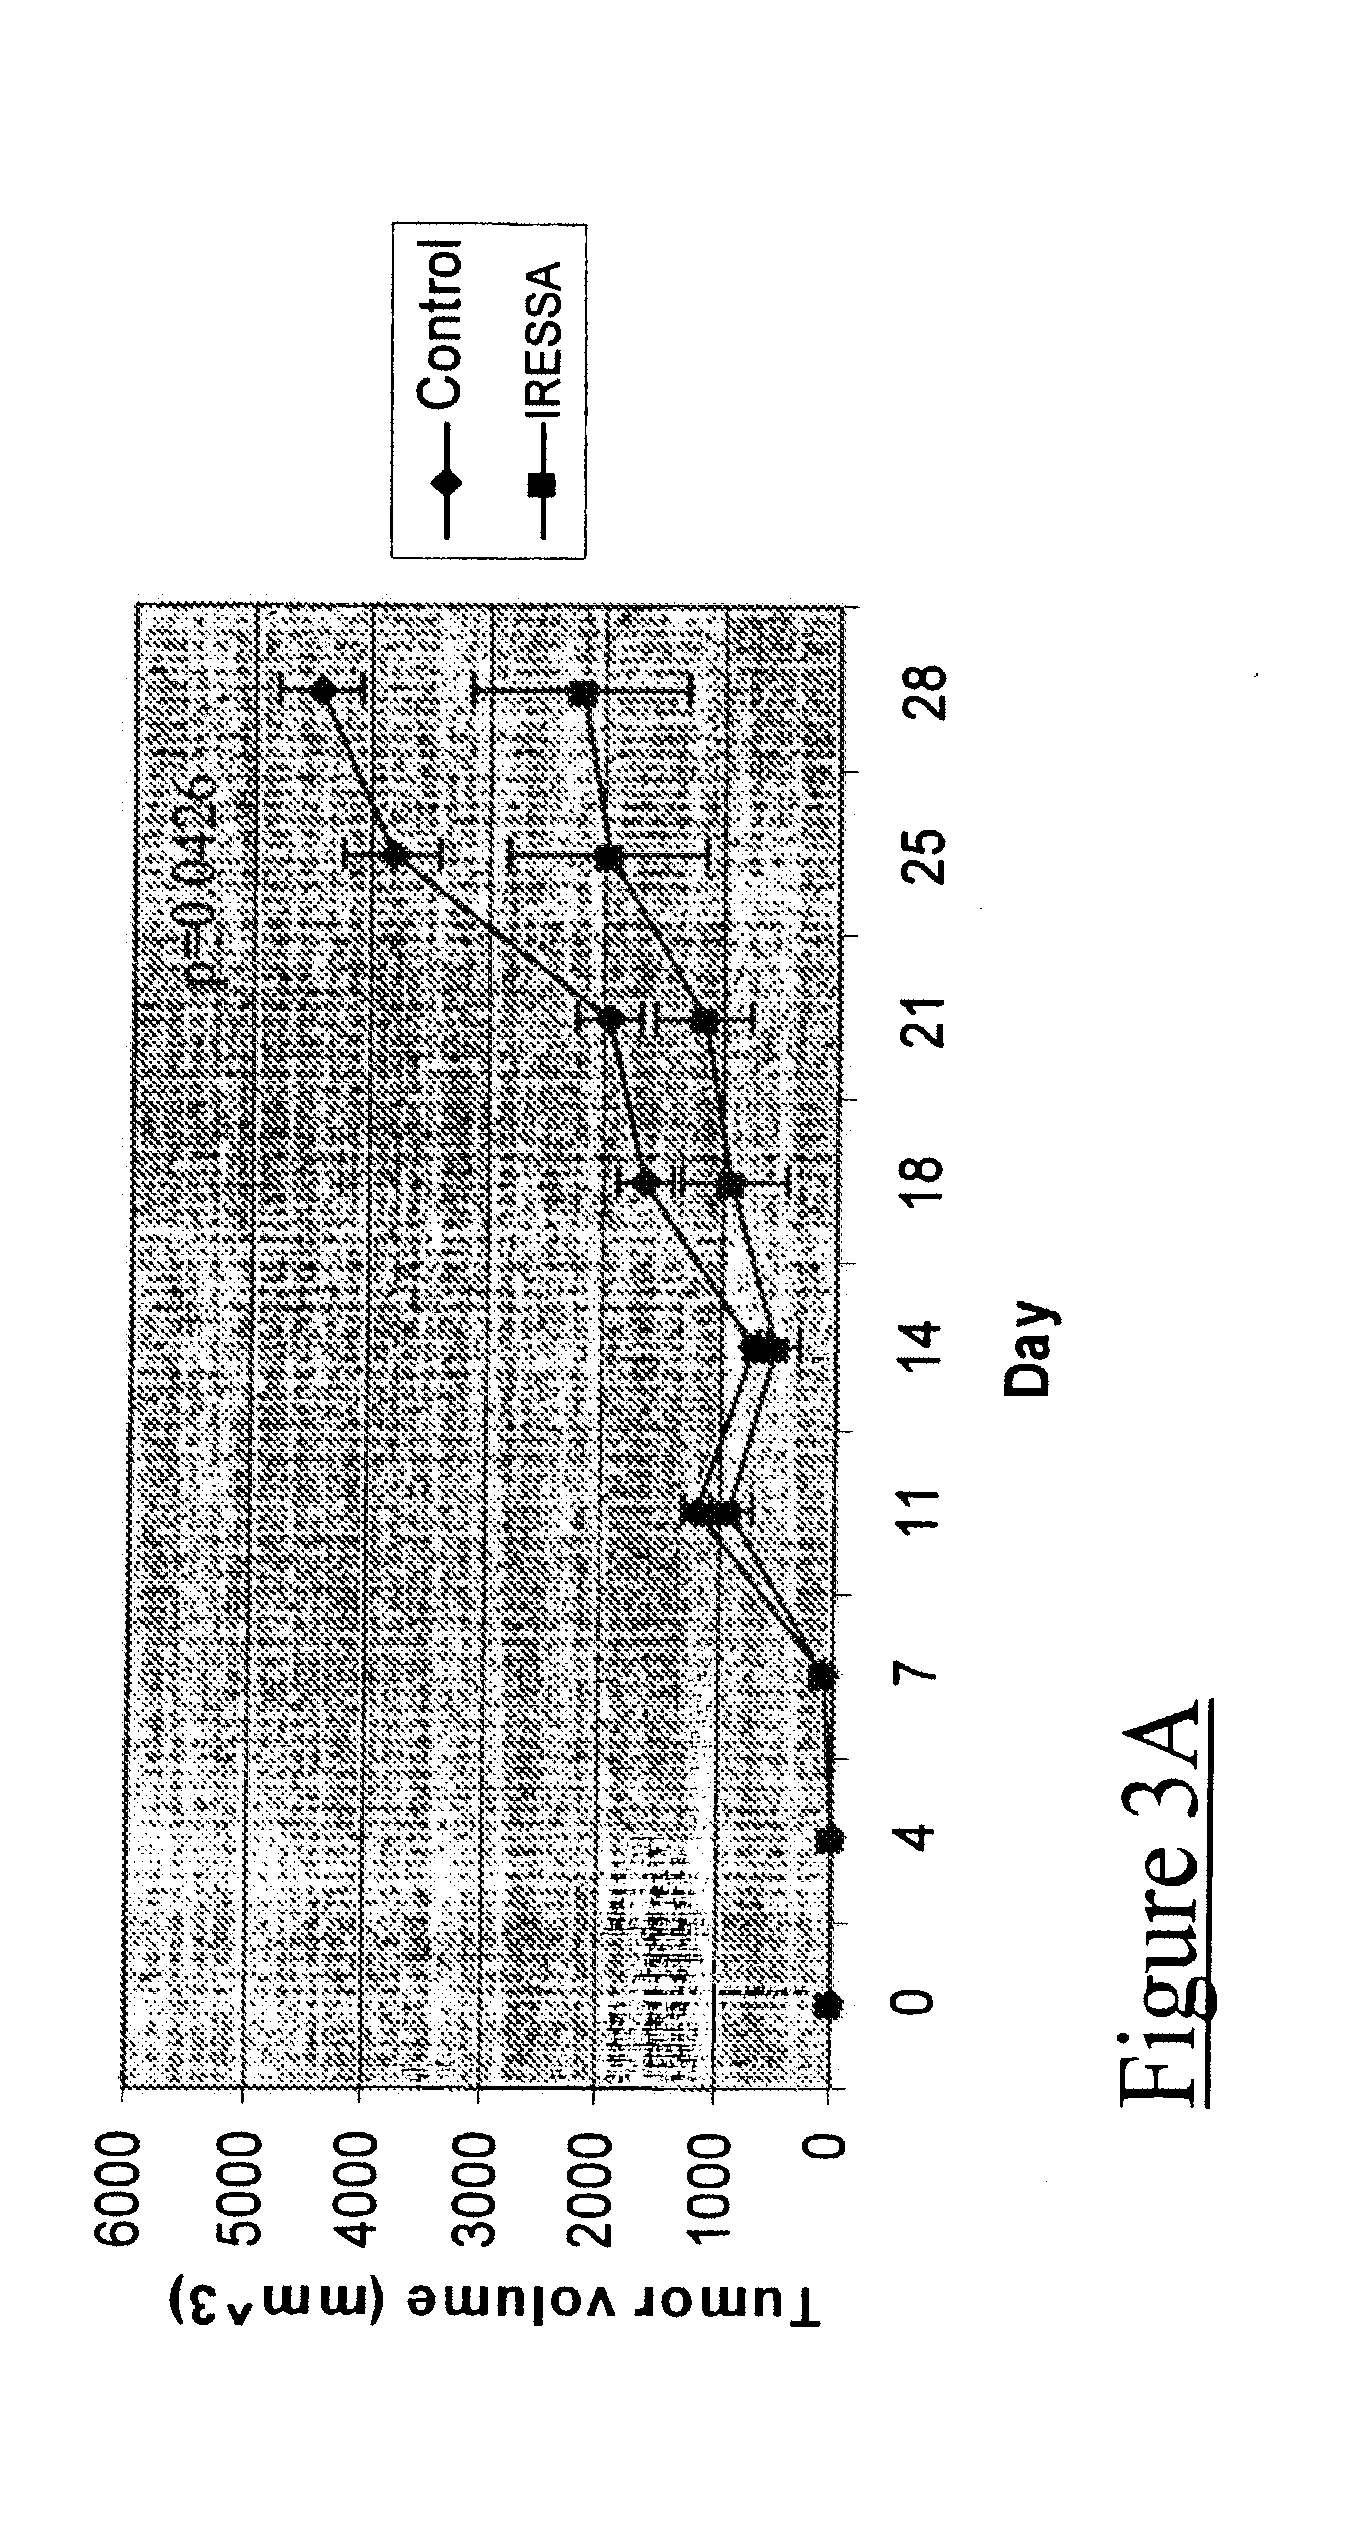 Method Of Screening For Sensitivity To Kinase Inhibitor Therapy